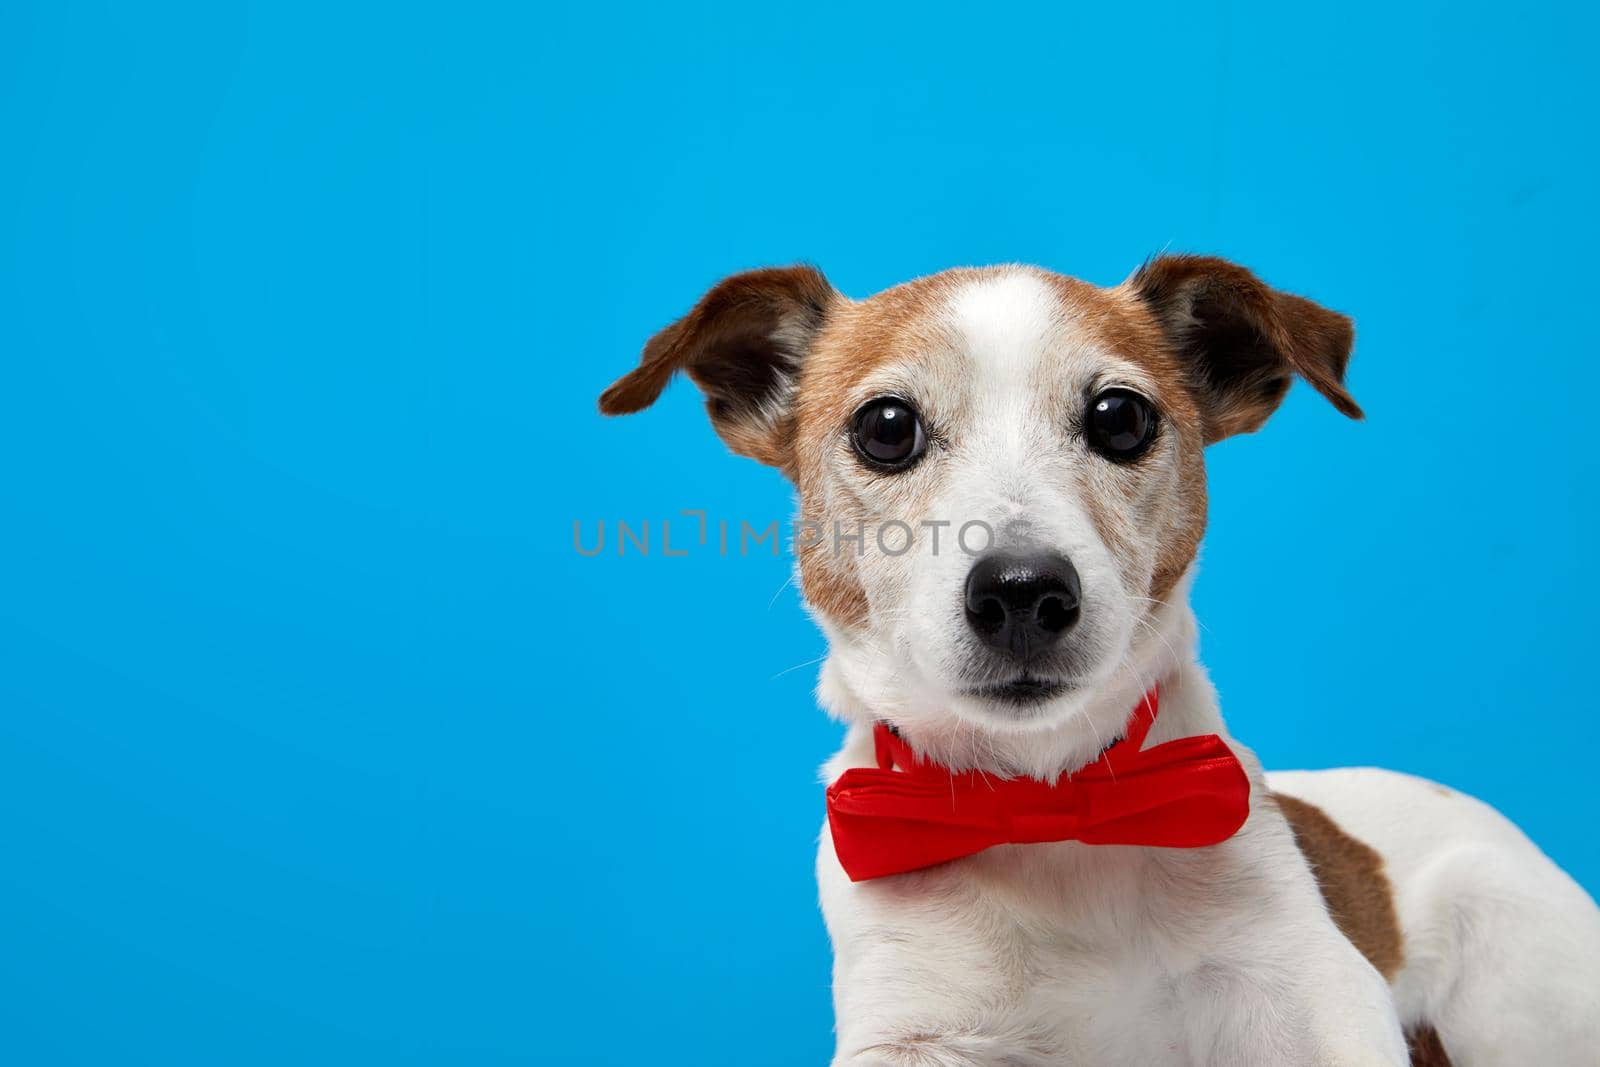 Cute dog with bow tie in studio by Demkat